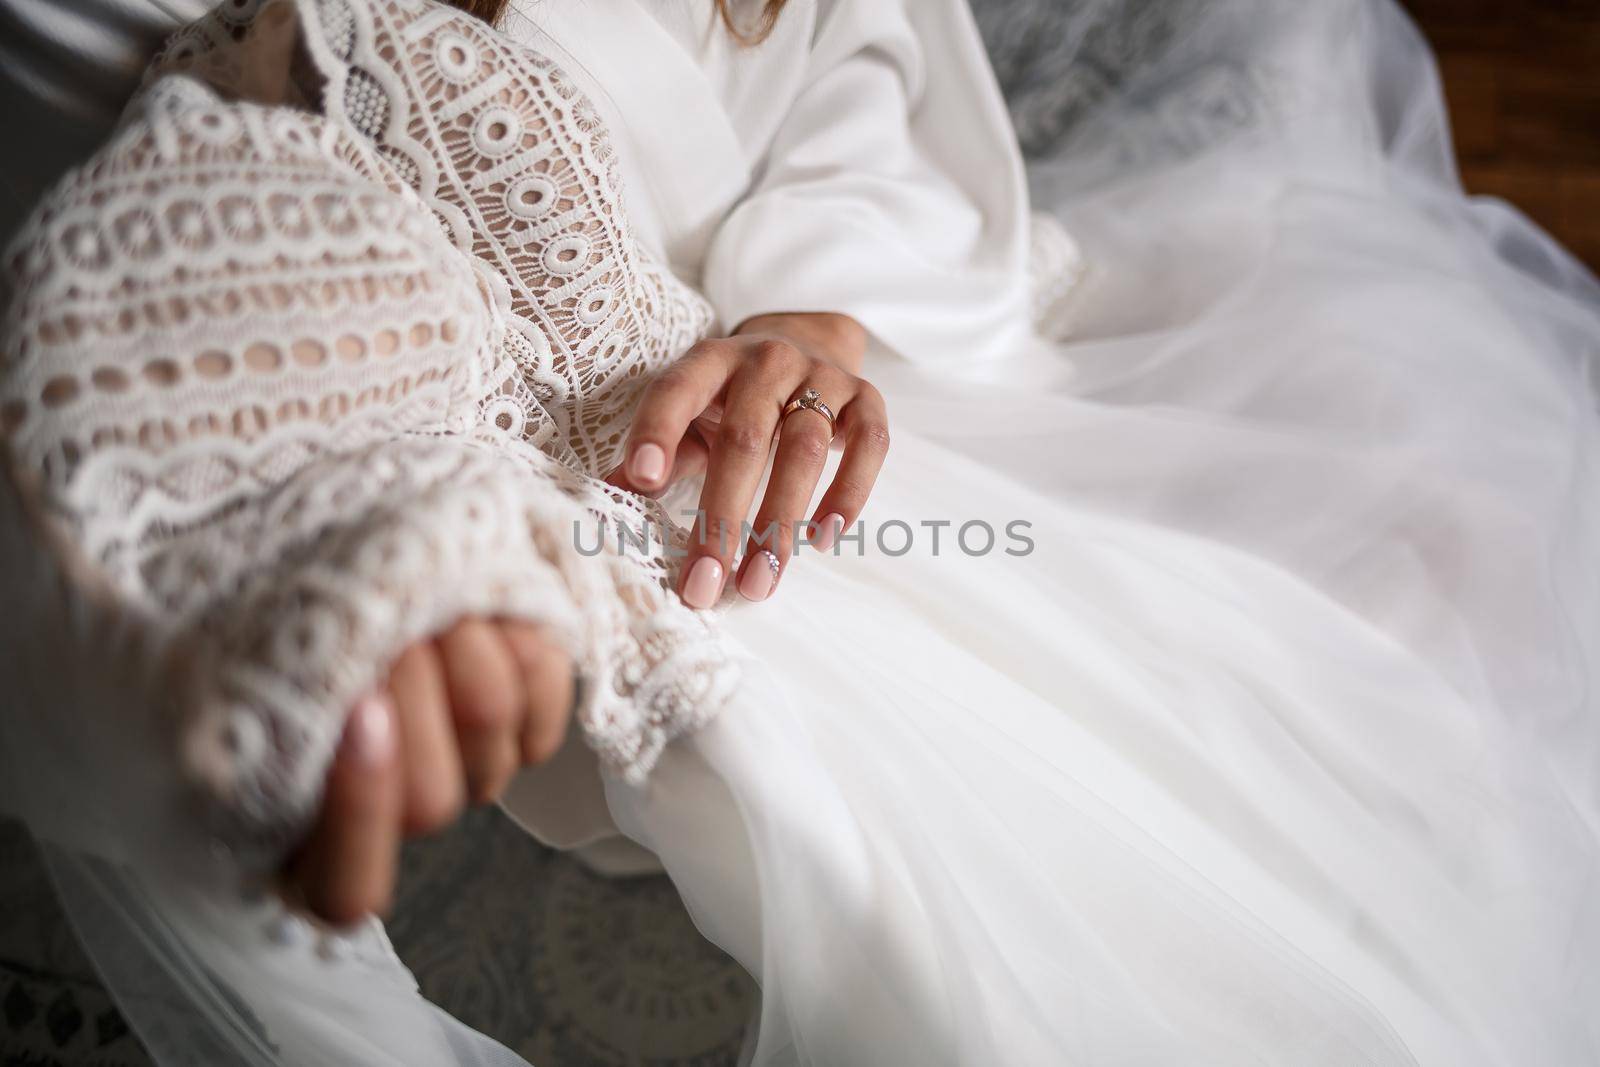 The bride holds a white dress in her hands on the wedding day.